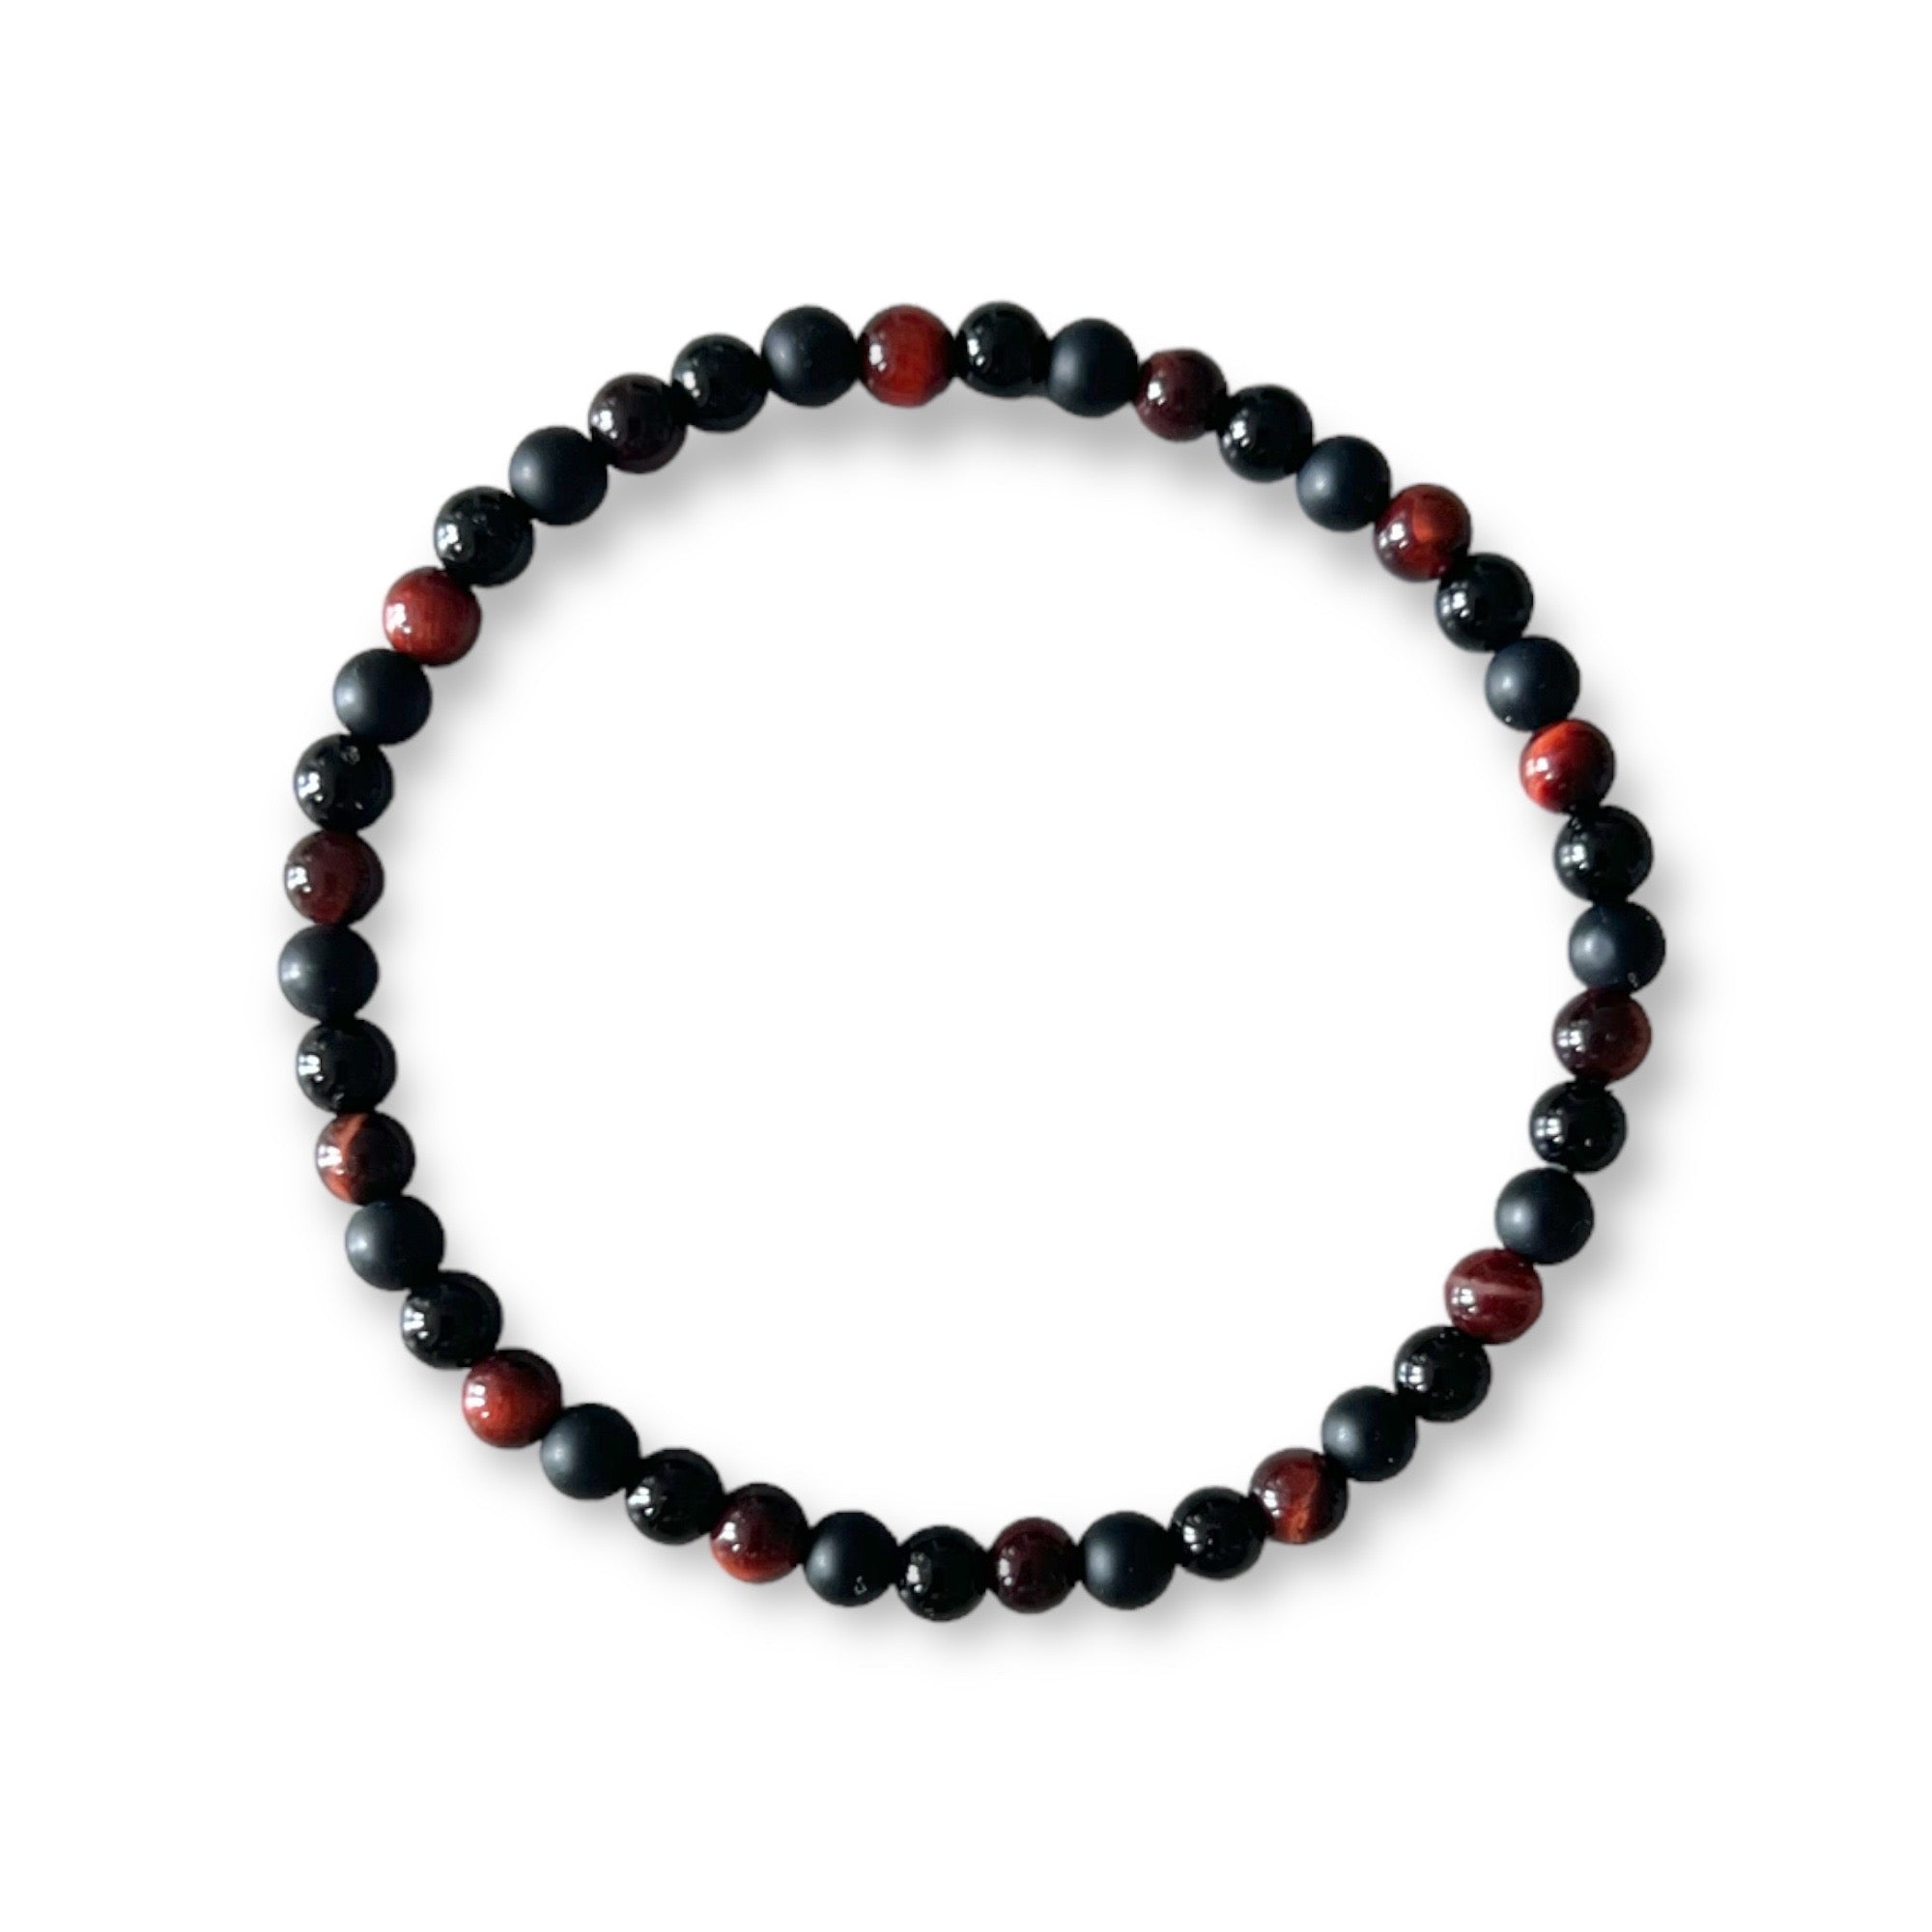 4mm Red Tigers Eye, Black Matte Onyx, Black Smooth Onyx (Stone of Courage and Grounding)